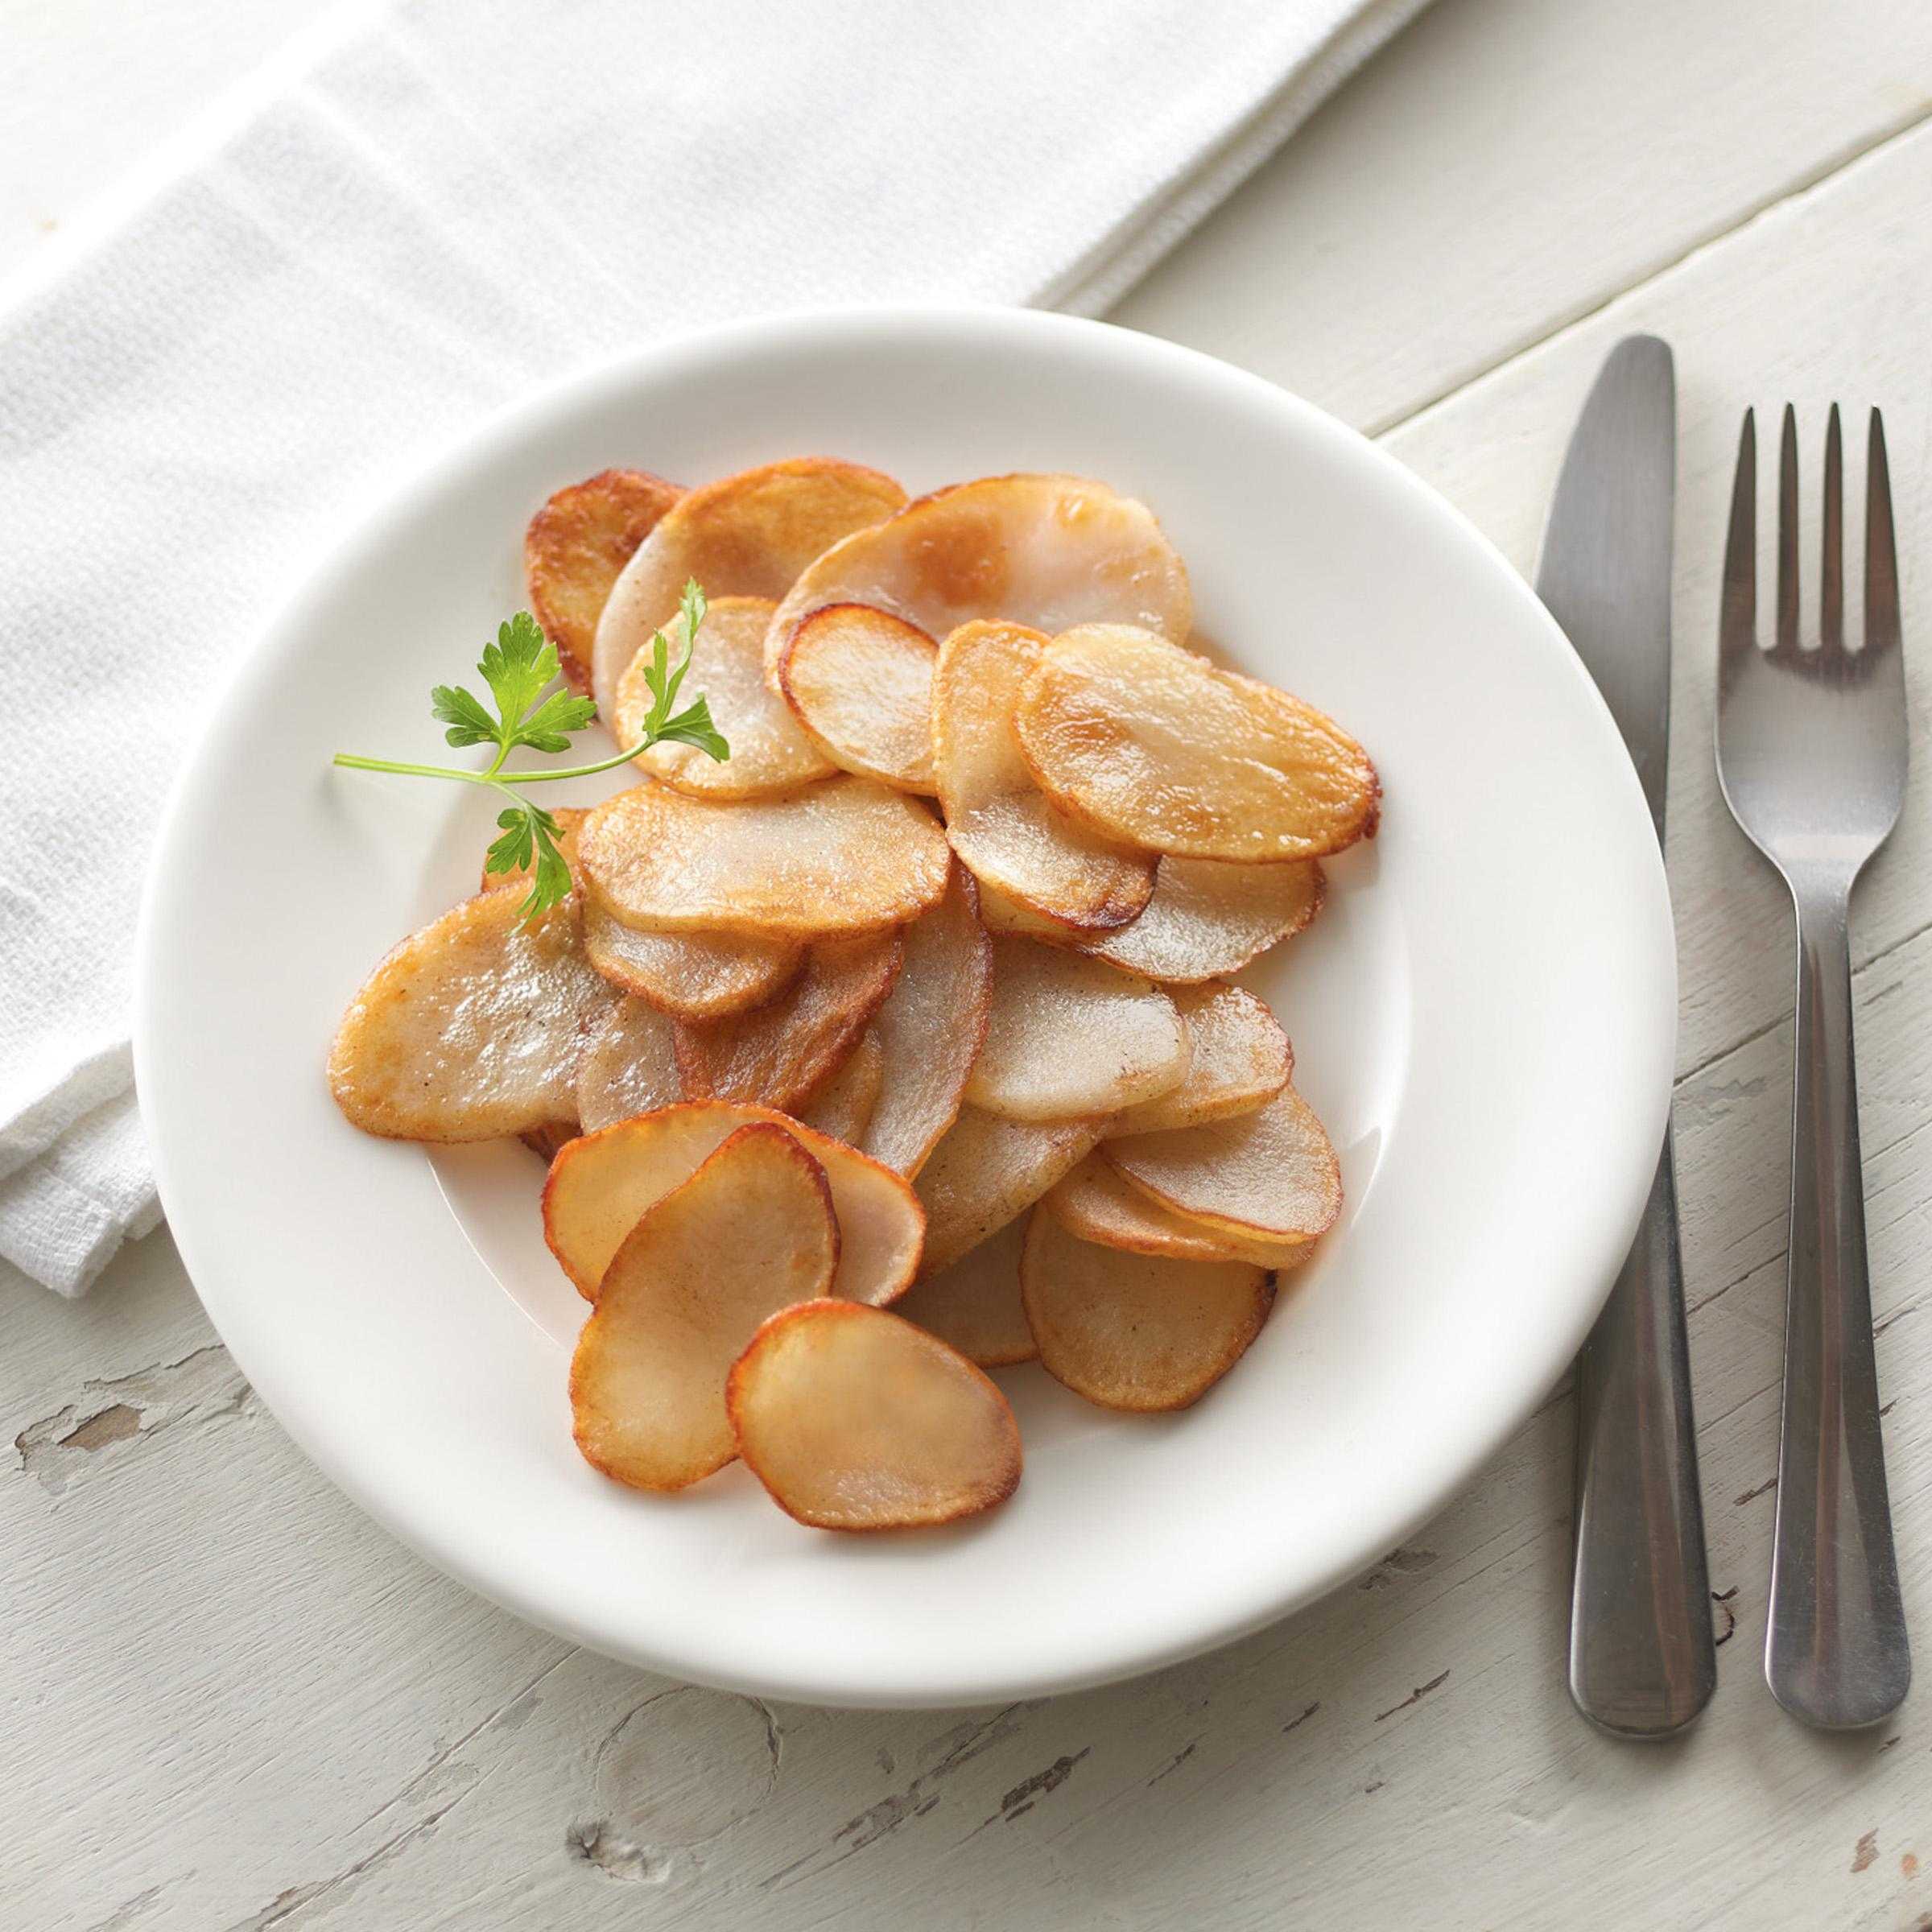 Simply Potatoes® Refrigerated American Home Fries Sliced Potatoes made with peeled Russet potatoes sliced 1/8